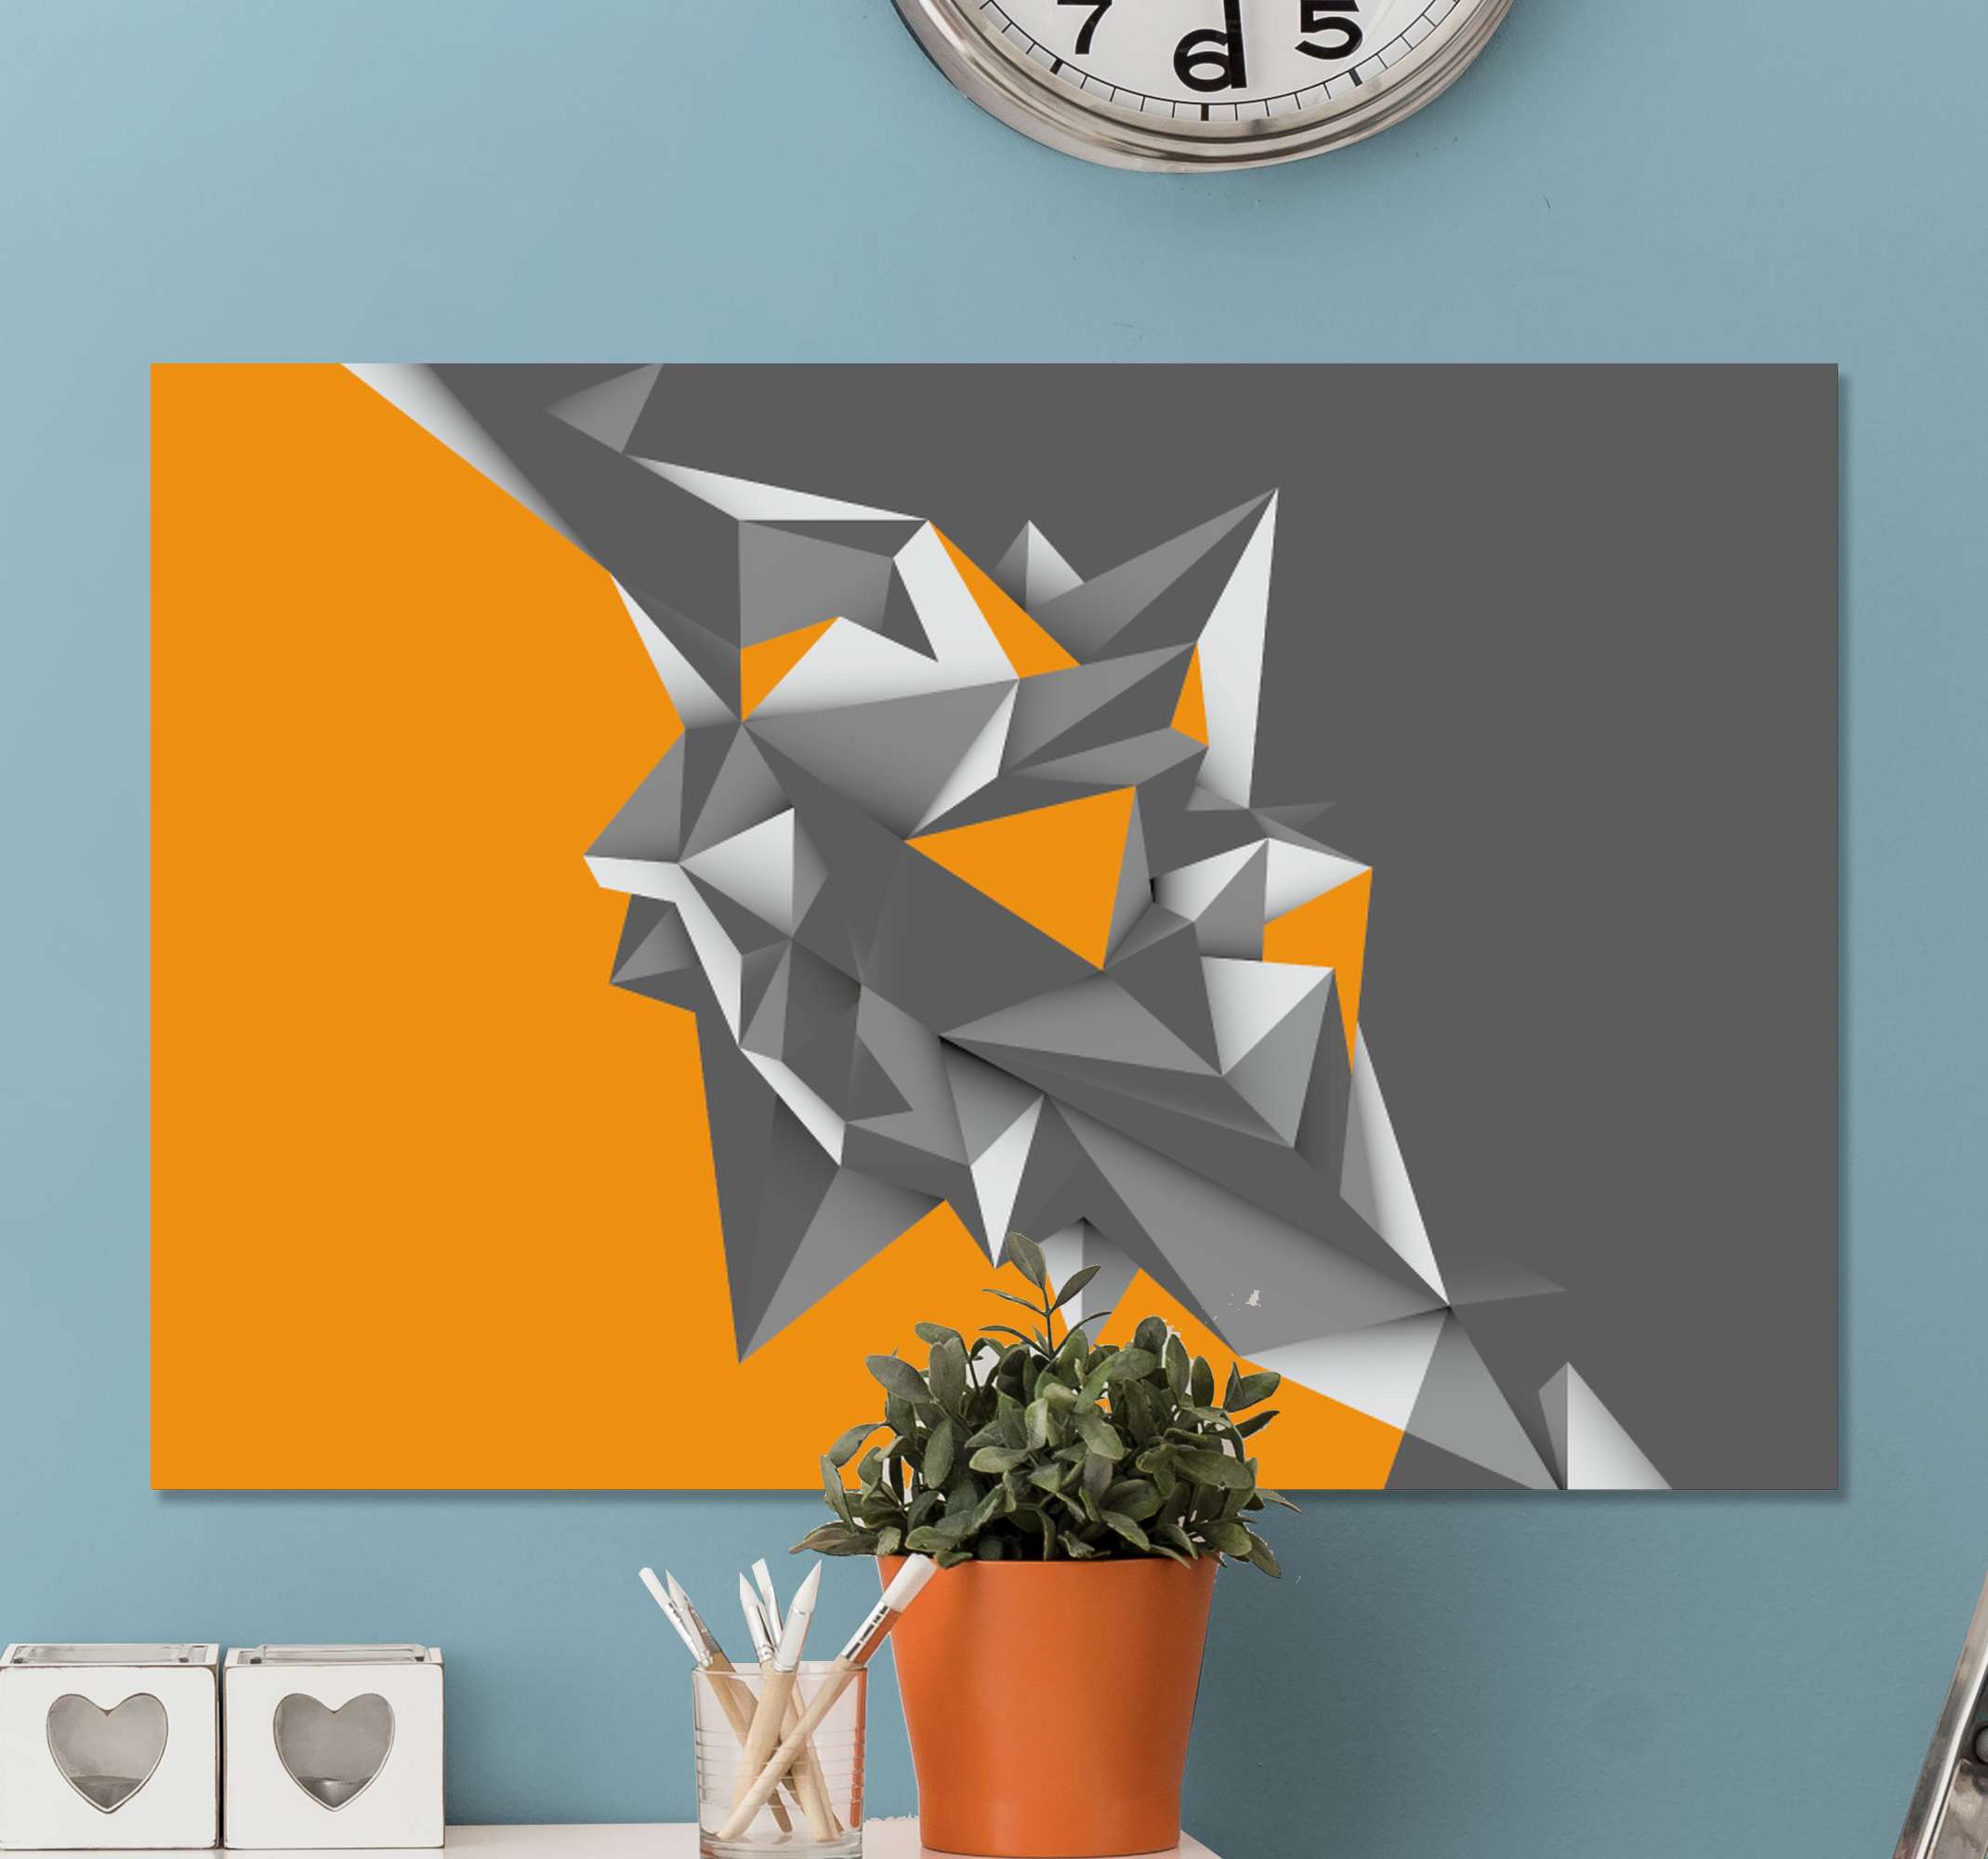 Triangles abstract art geometric wall canvas - TenStickers